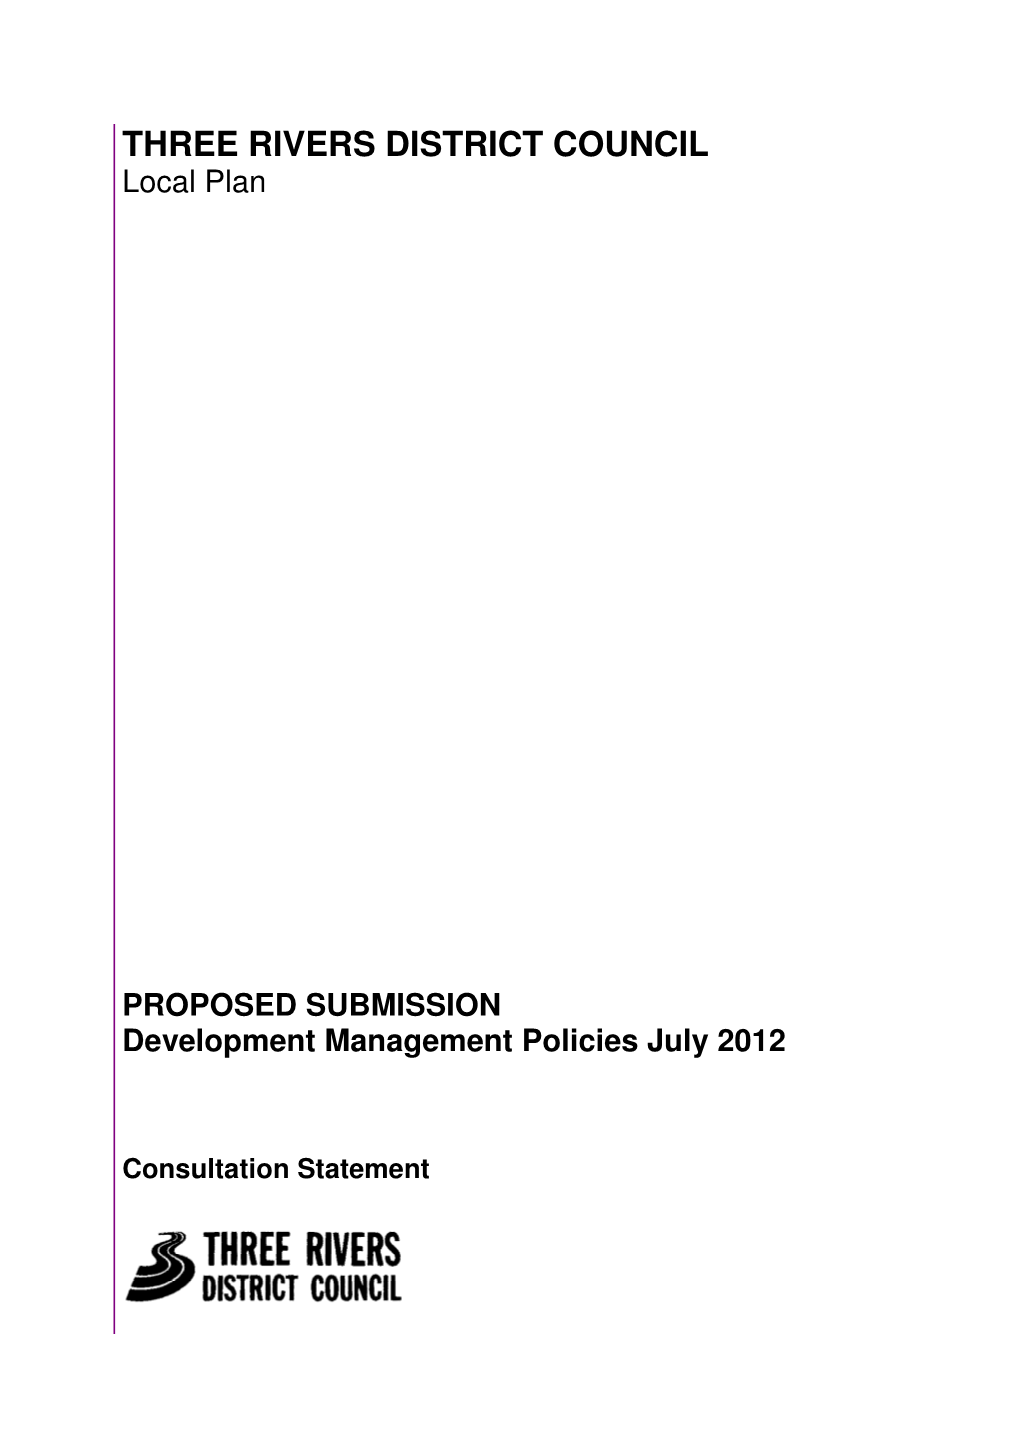 Local Plan PROPOSED SUBMISSION Development Management Policies July 2012